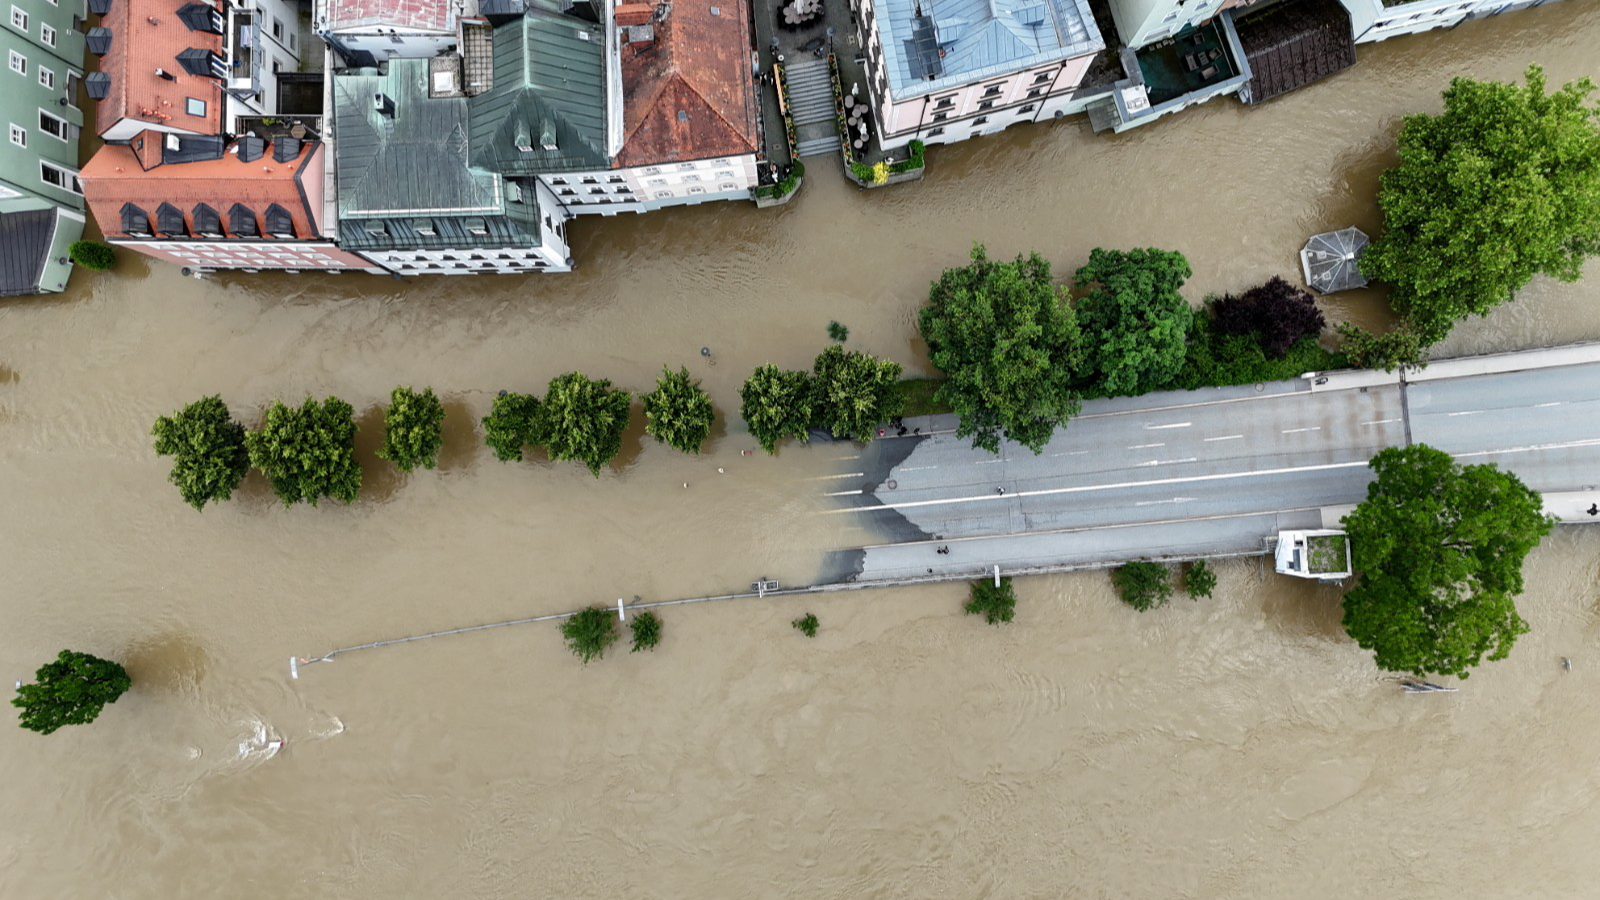 A drone shot shows the flood-affected area at the Donau river following heavy rainfalls in Passau. /Ayhan Uyanik/Reuters